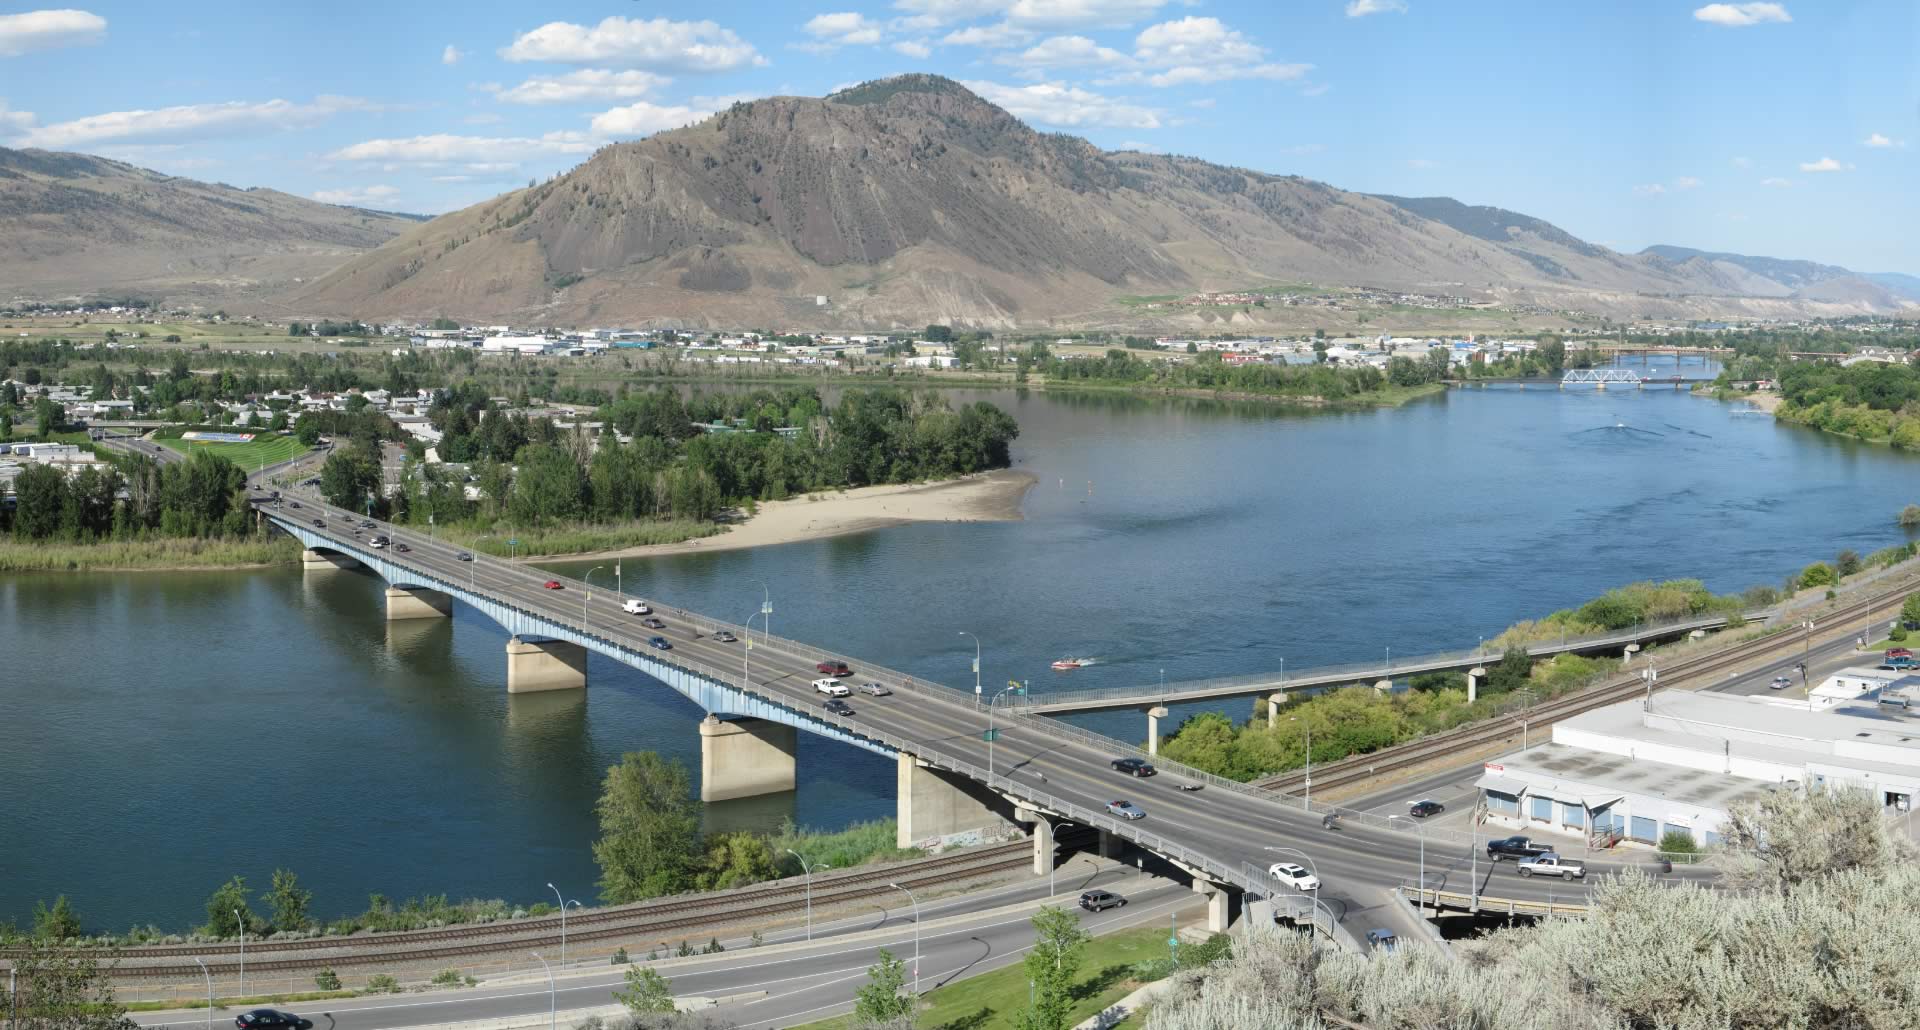 A few 2020 thoughts for Kamloops….